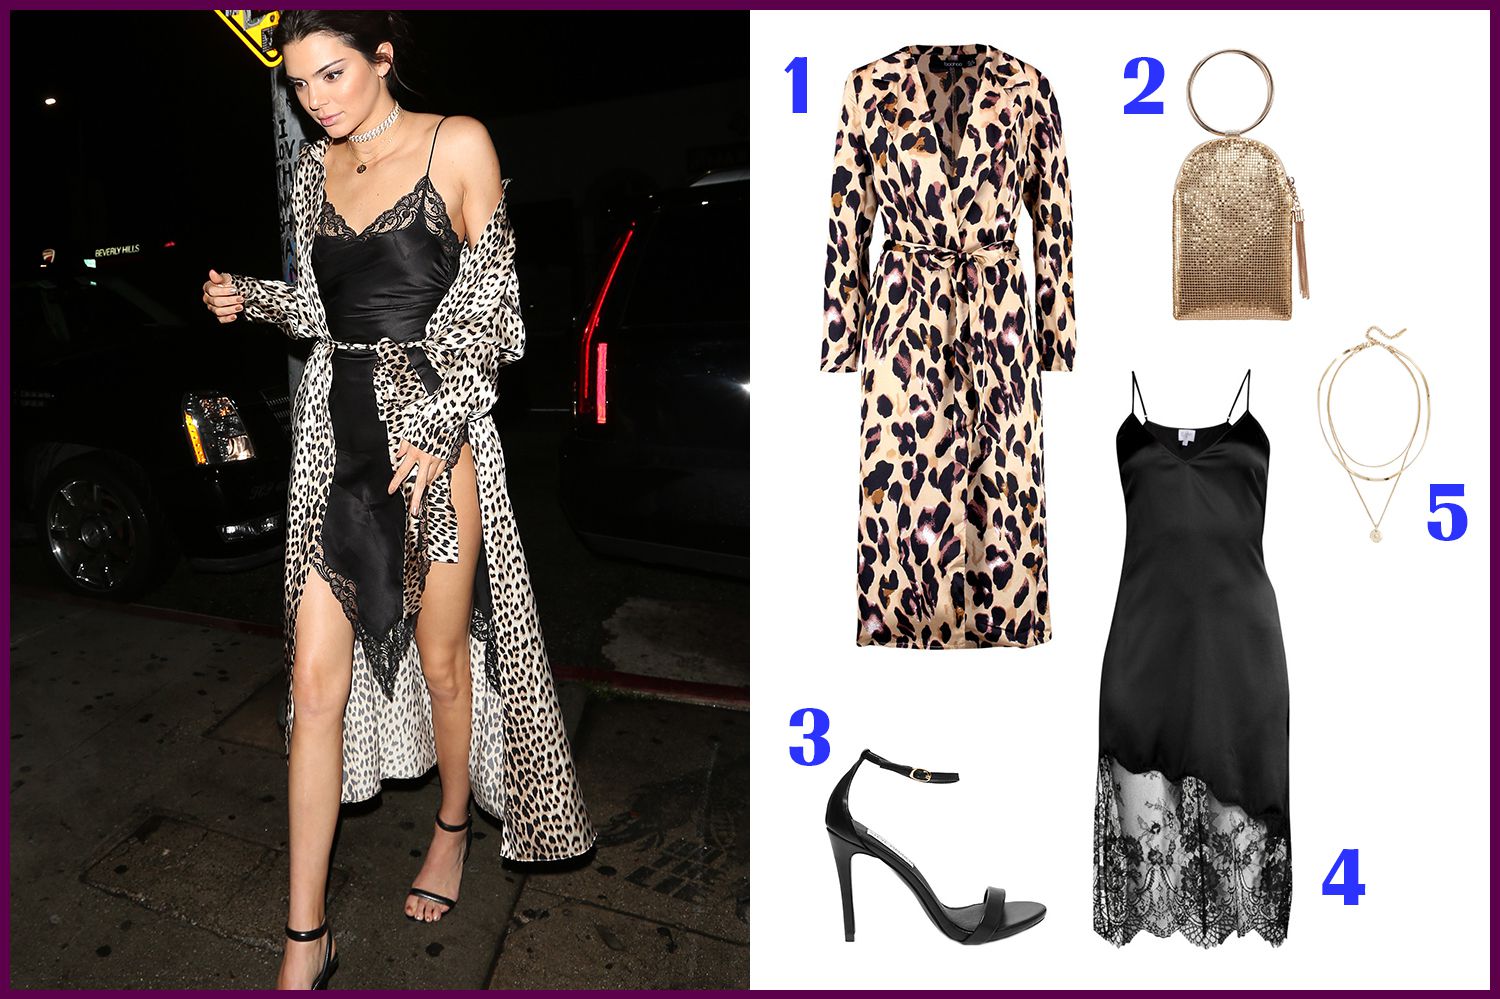 New Year's Eve Outfit Ideas - What to Wear for New Year's Eve